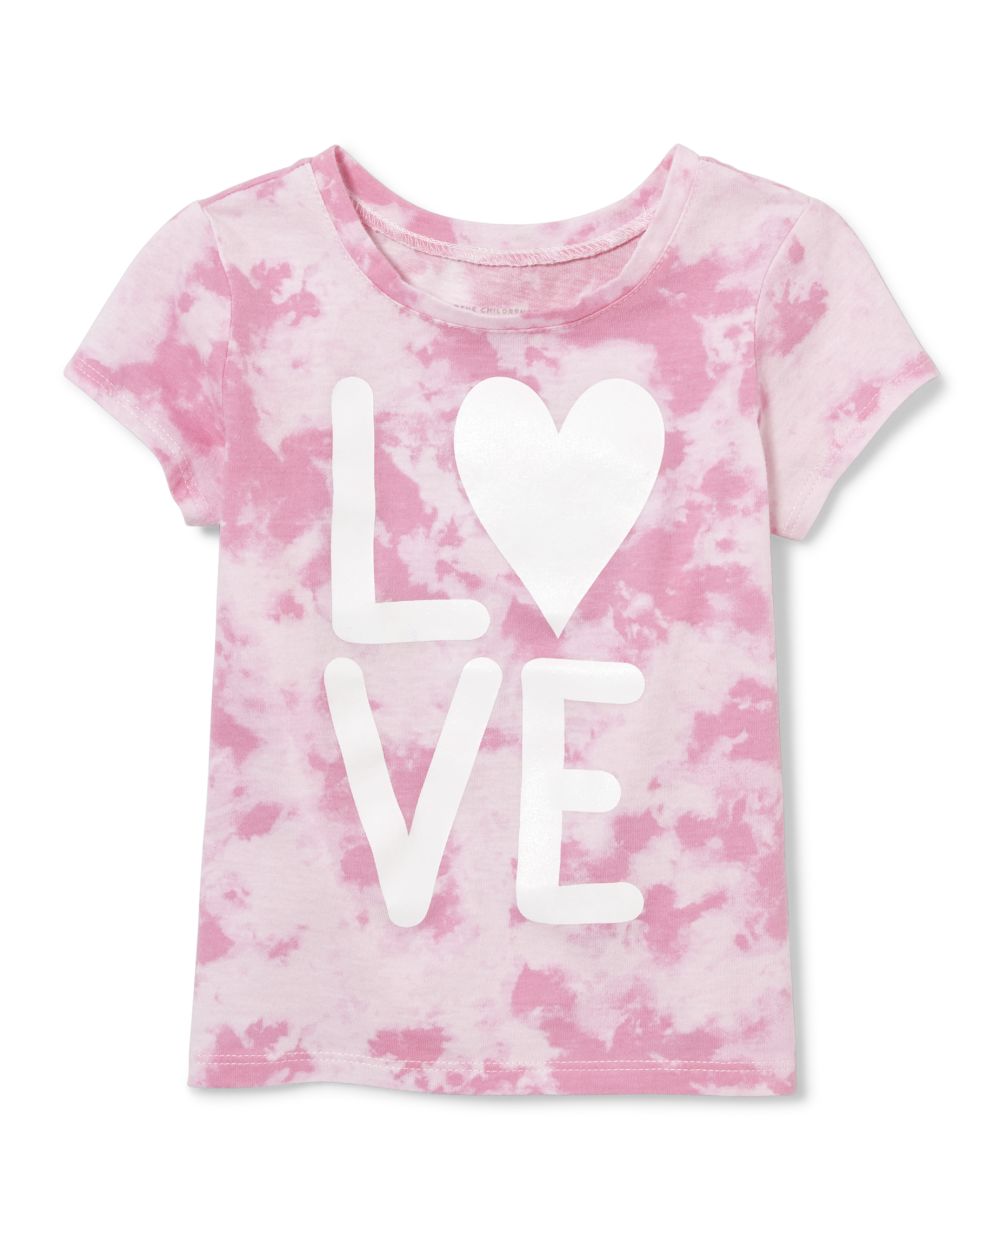 Baby And Toddler Girls Short Sleeve 'LOVE' Tie Dye Graphic Tee